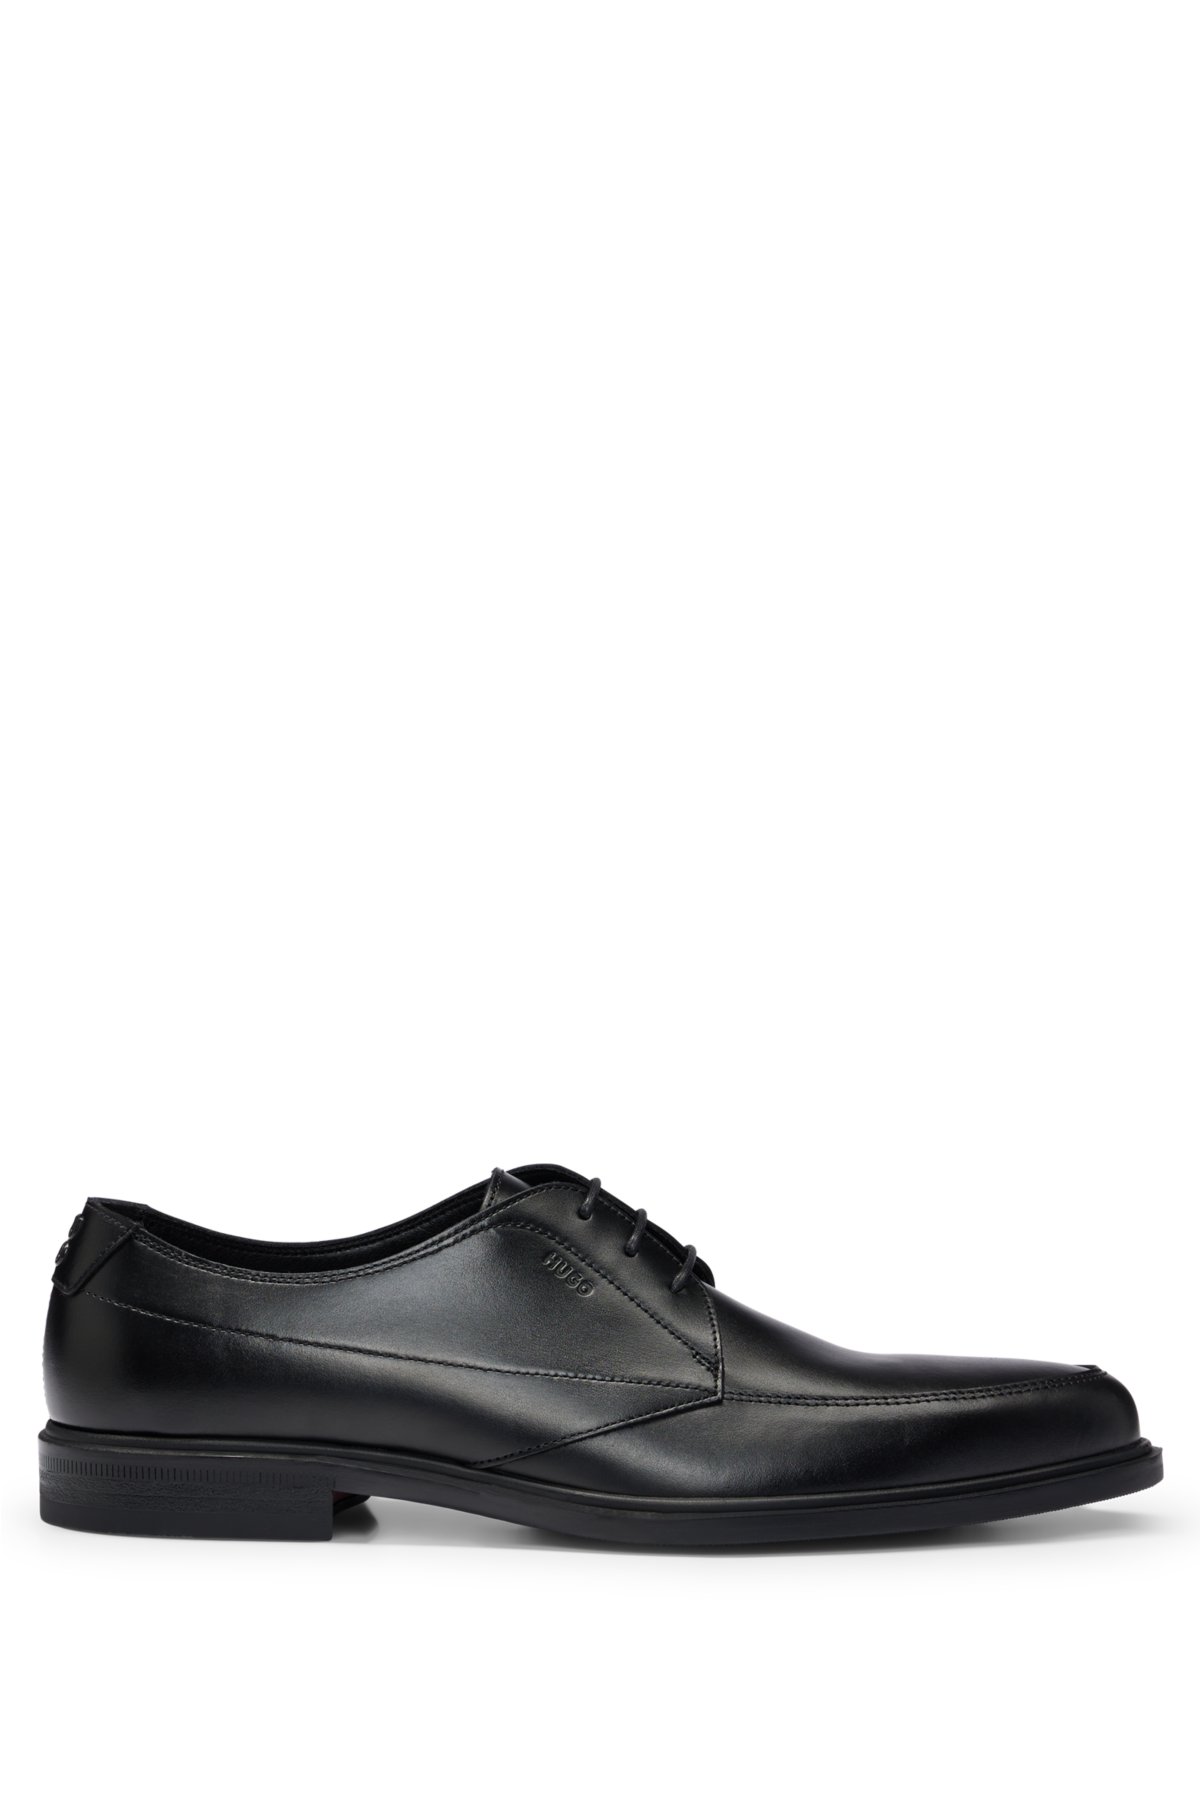 Leather Derby lace-up shoes with embossed branding, Black